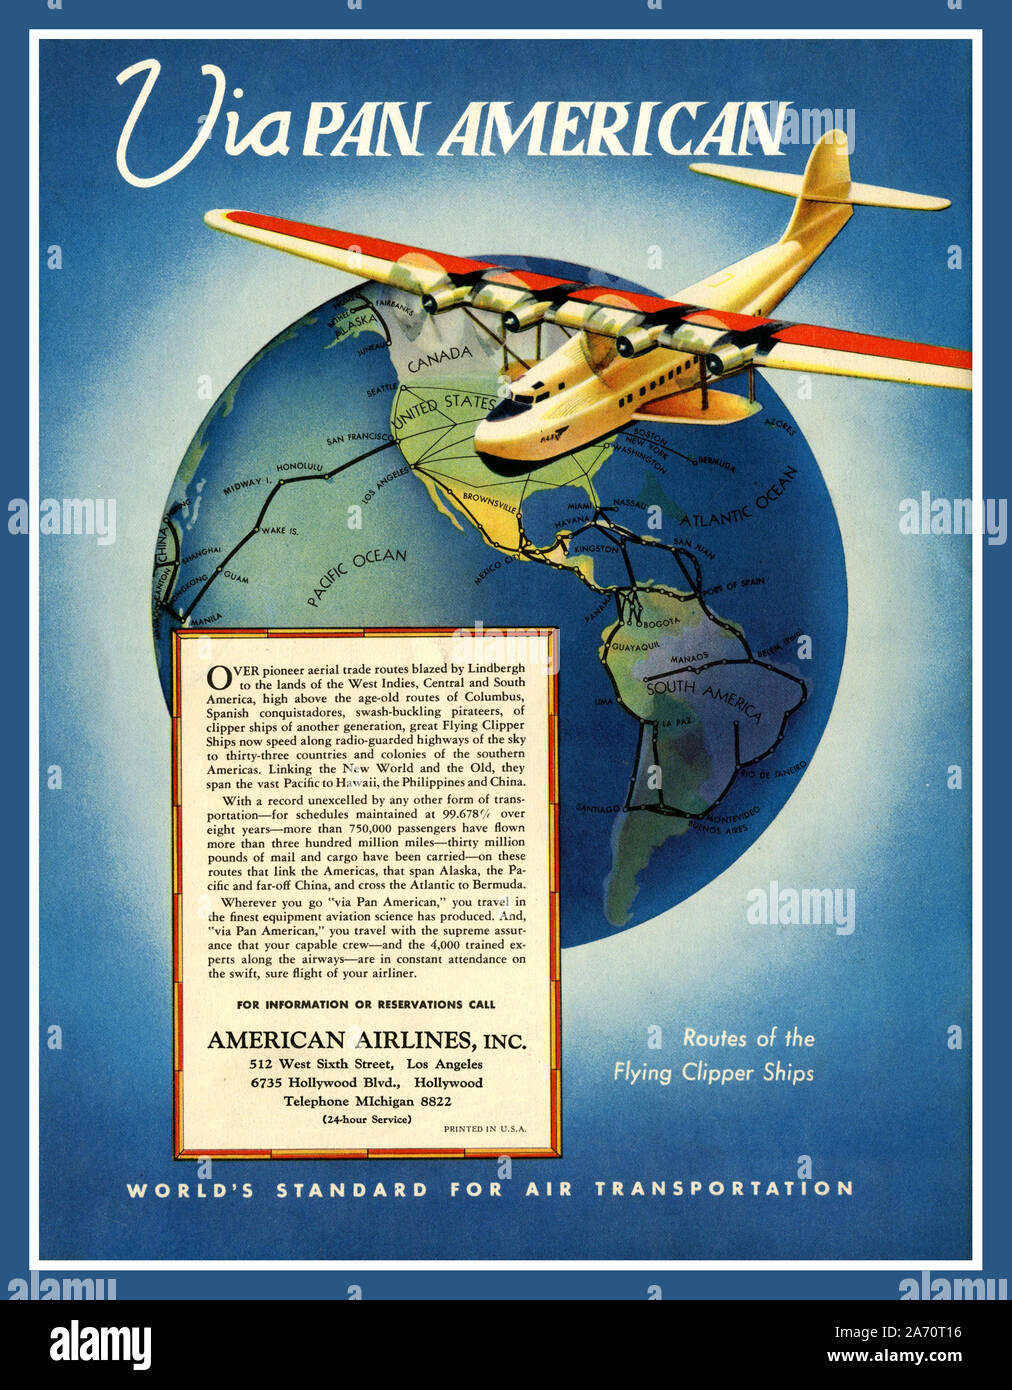 Vintage American 1930's Airline Poster retro Pan American Flying Clipper Ships global flying routes in a M-130 Flying Clipper Ship Sea Plane. The worlds standard for air transportation. USA America Stock Photo